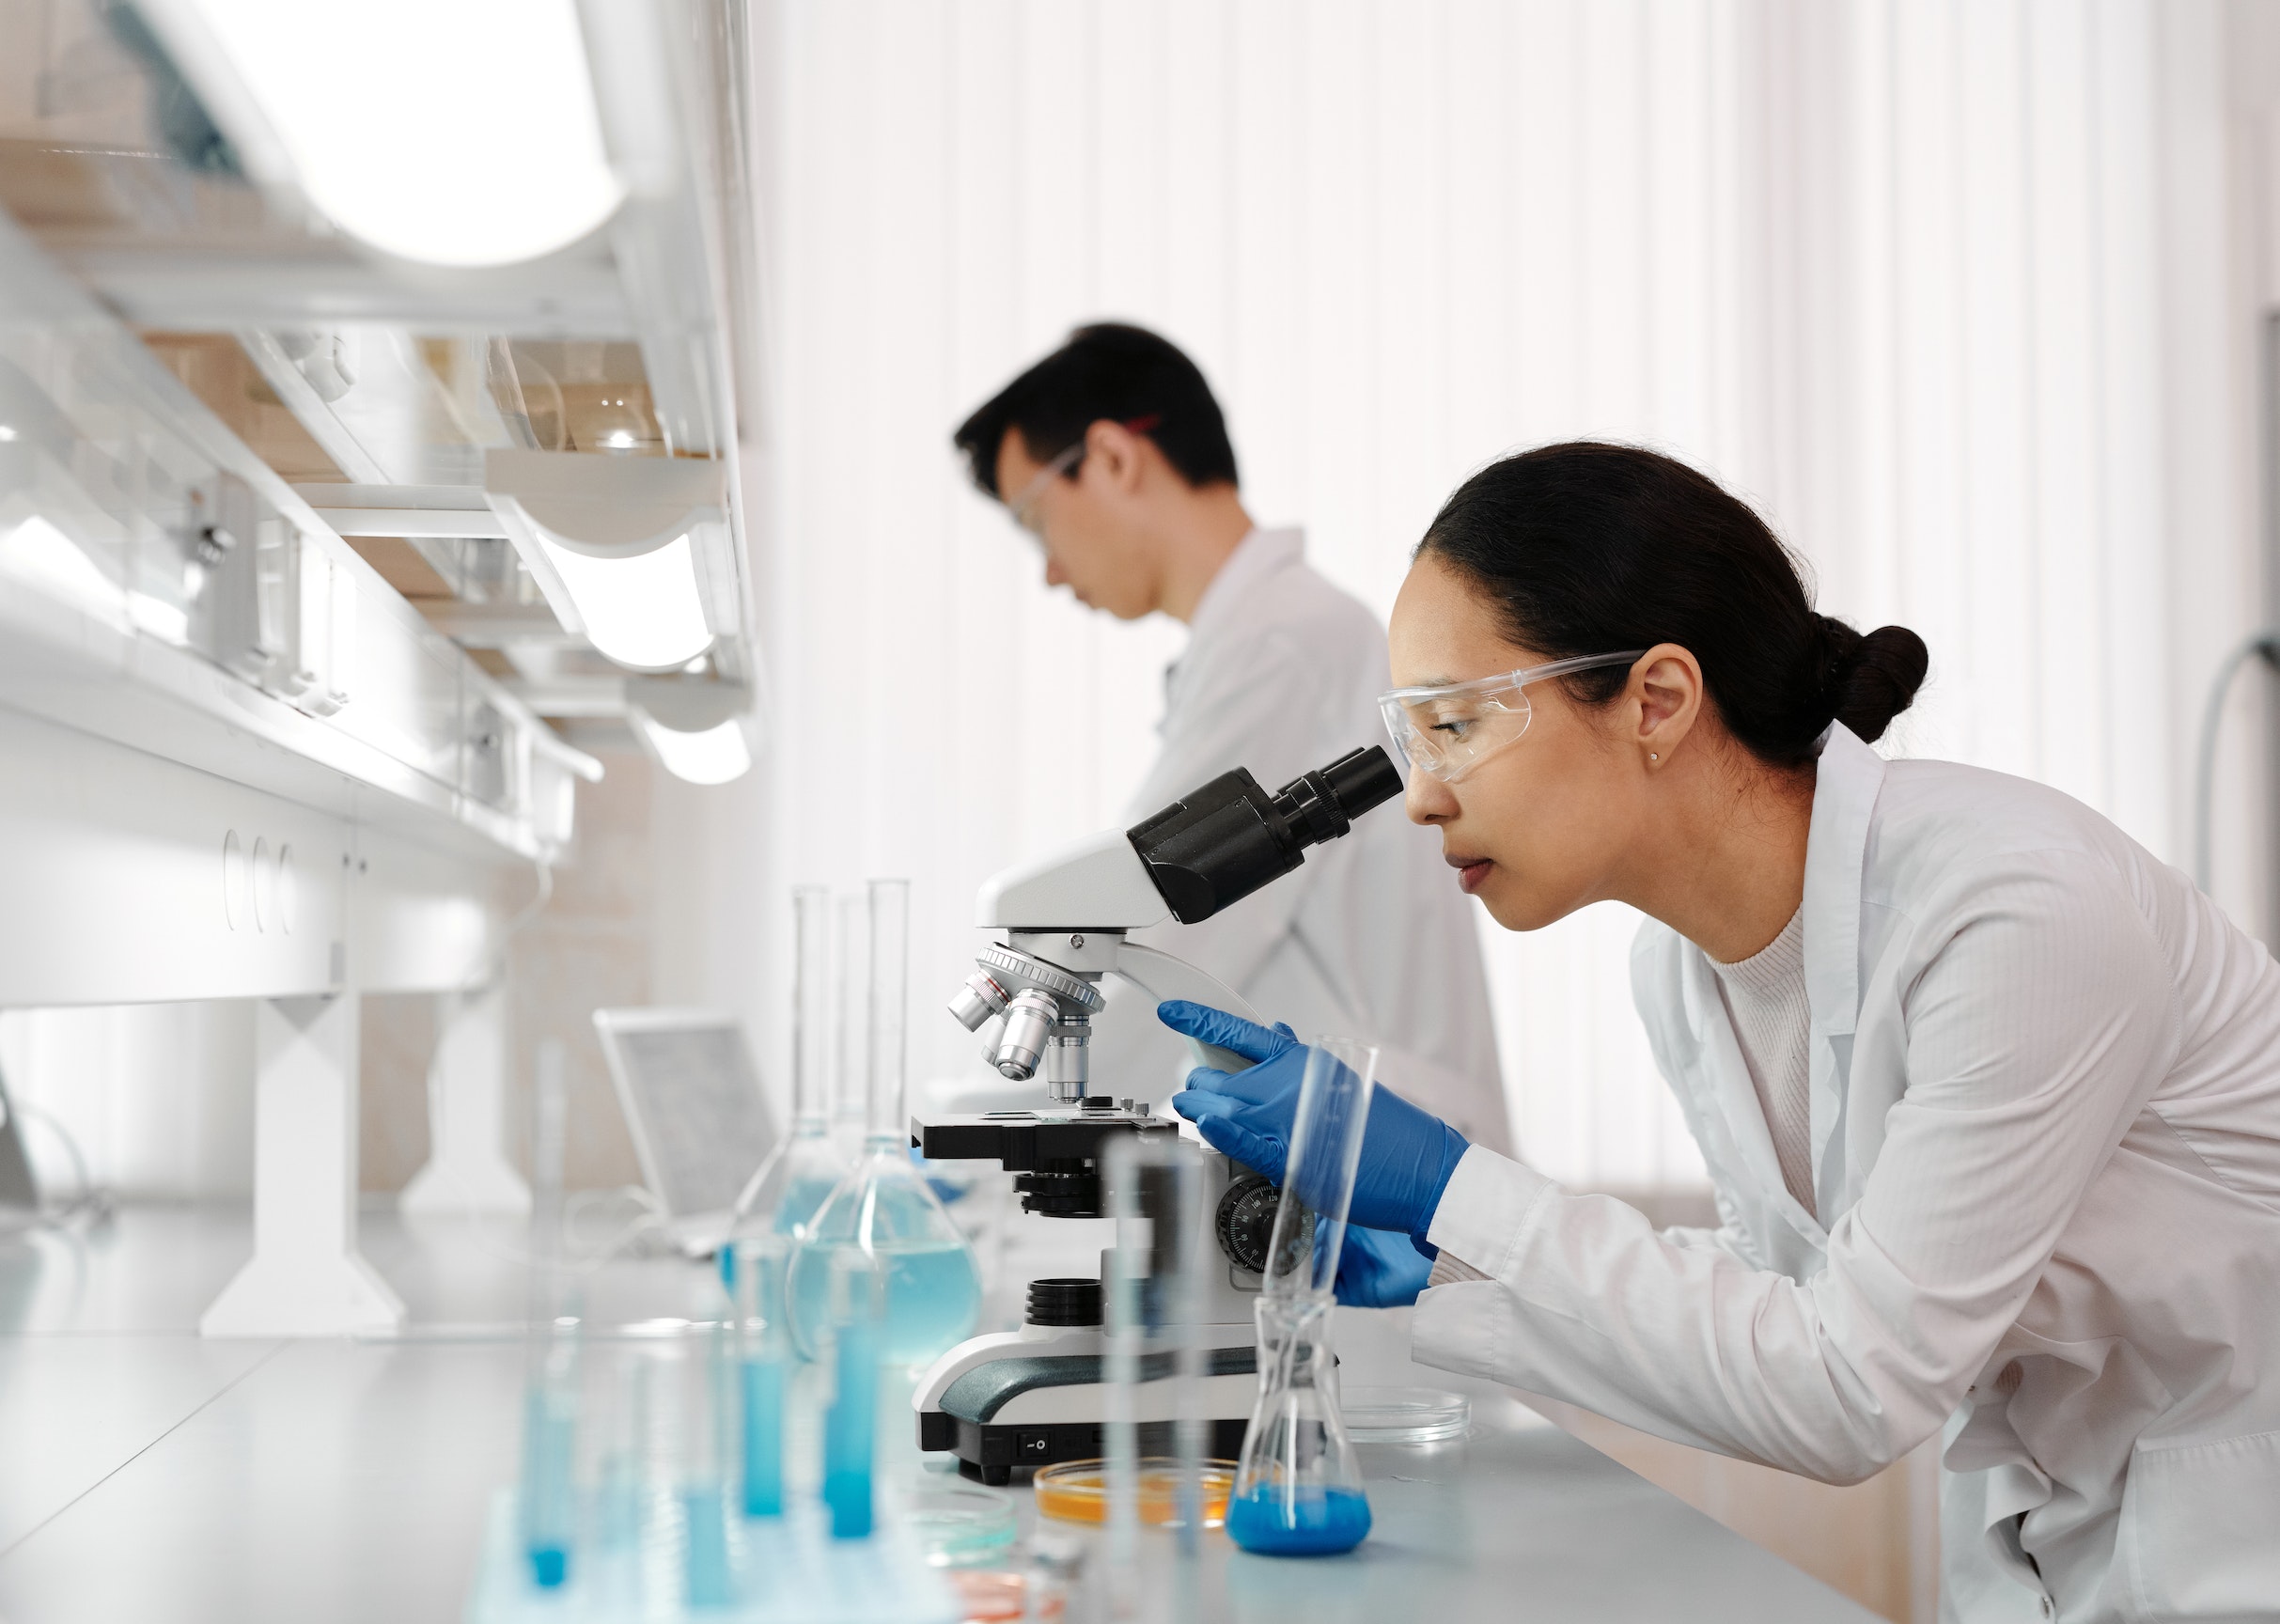 Two physicians inside of a lab. The physicians are wearing white lab coats and are analyzing test samples.